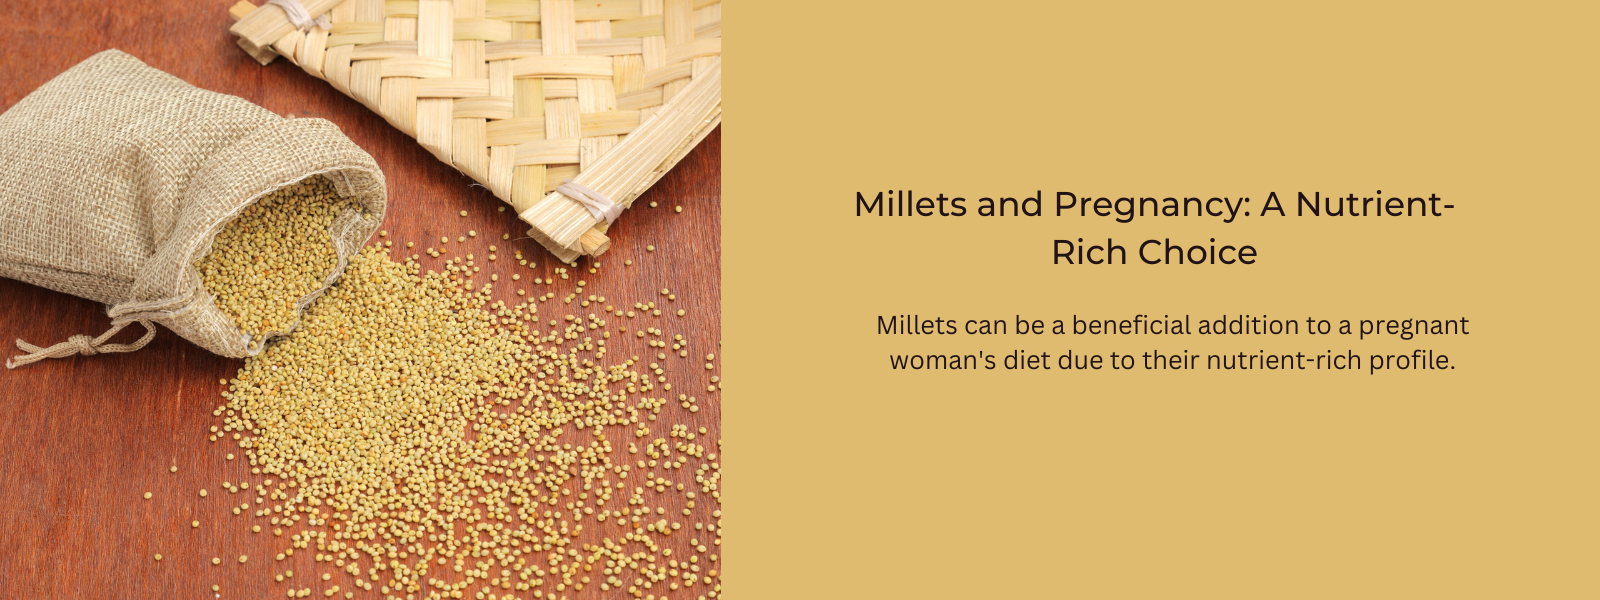 Millets and Pregnancy: A Nutrient-Rich Choice